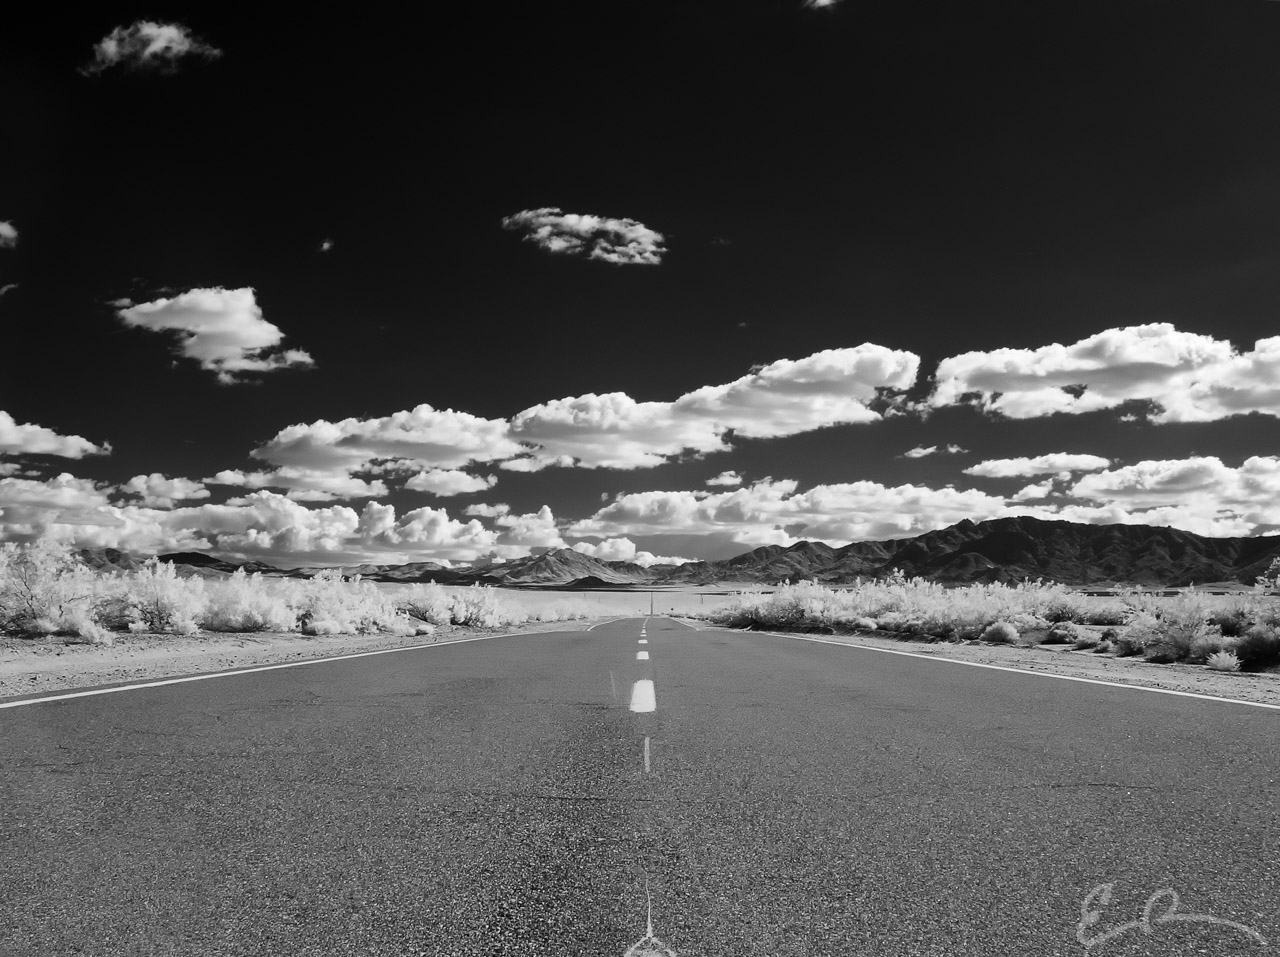 Along Ivanpah Road in Infrared